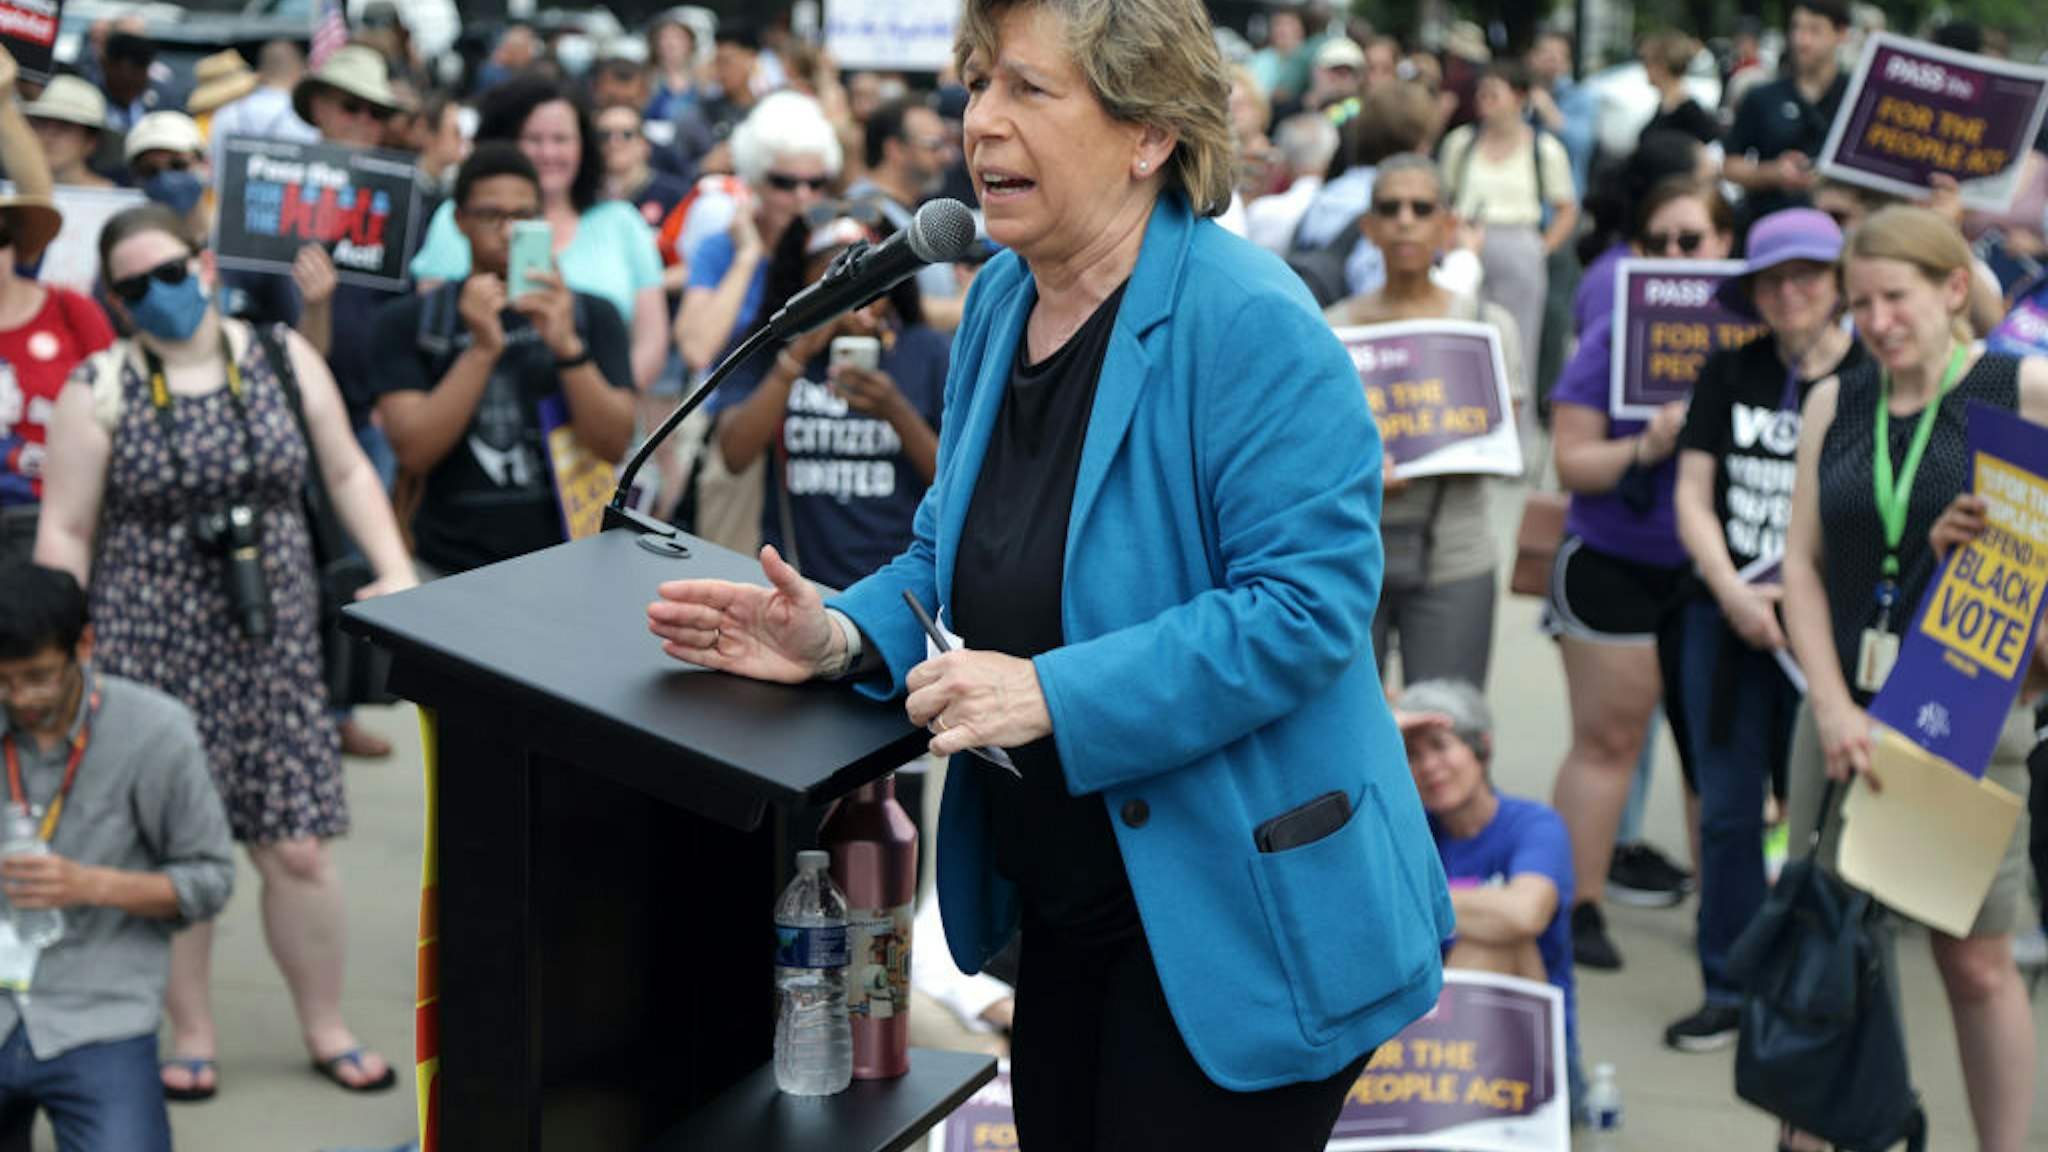 WASHINGTON, DC - JUNE 09: Randi Weingarten, president of the American Federation of Teachers, speaks during a rally in front of the U.S. Supreme Court June 9, 2021 in Washington, DC. People For the American Way (PFAW) and the Declaration for American Democracy coalition held a rally to call on the Senate to pass the For the People Act.